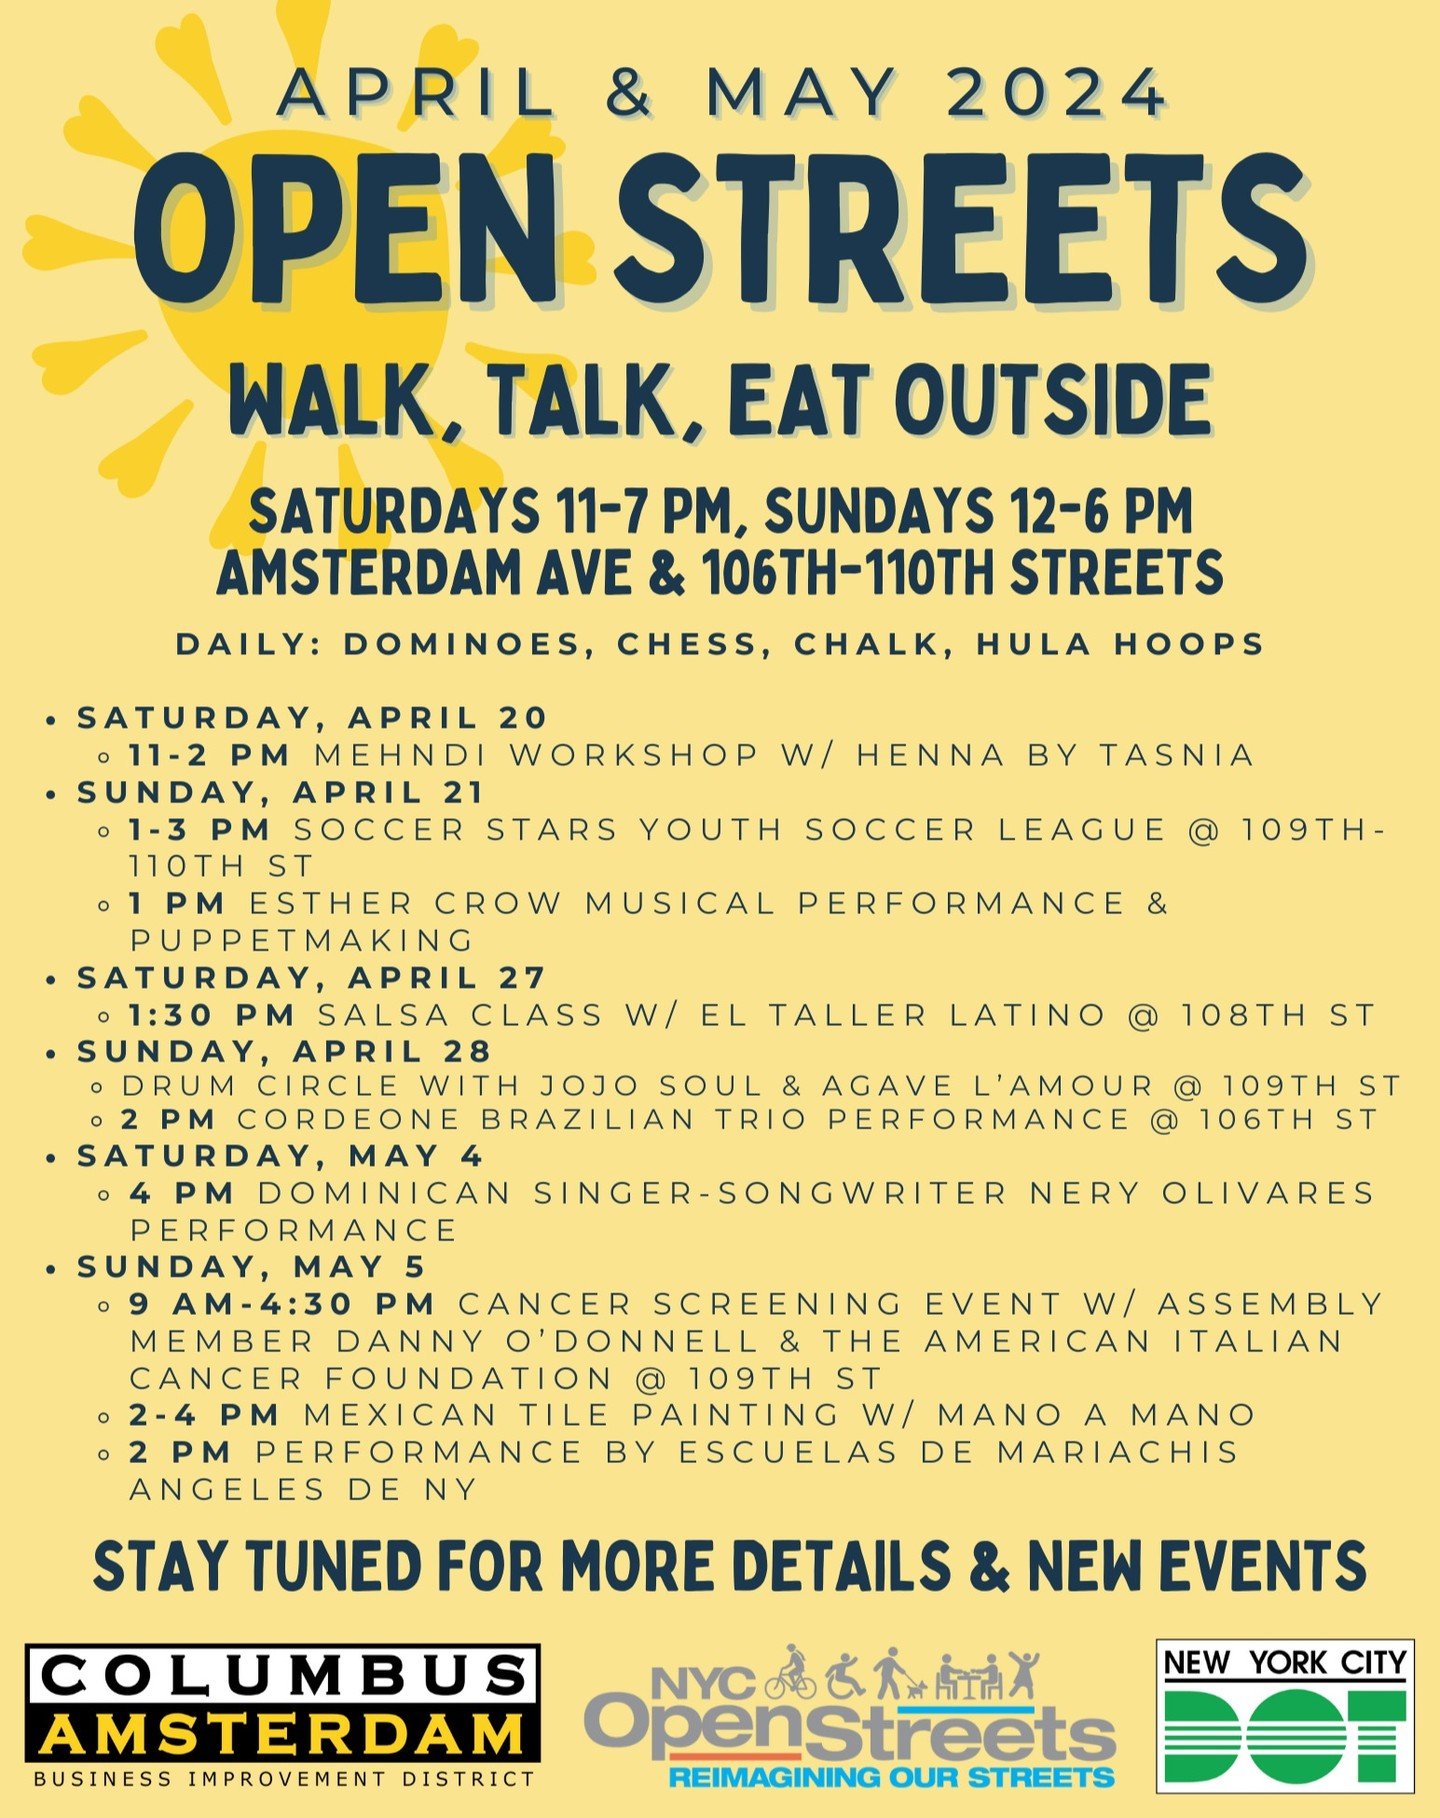 Don't miss it!! Open Streets officially opens on Amsterdam Ave from 106-110th sts on April 20 and we have prepared a series of family friendly activities and performances for the summer. We are so excited to work with our partners and hope that you a